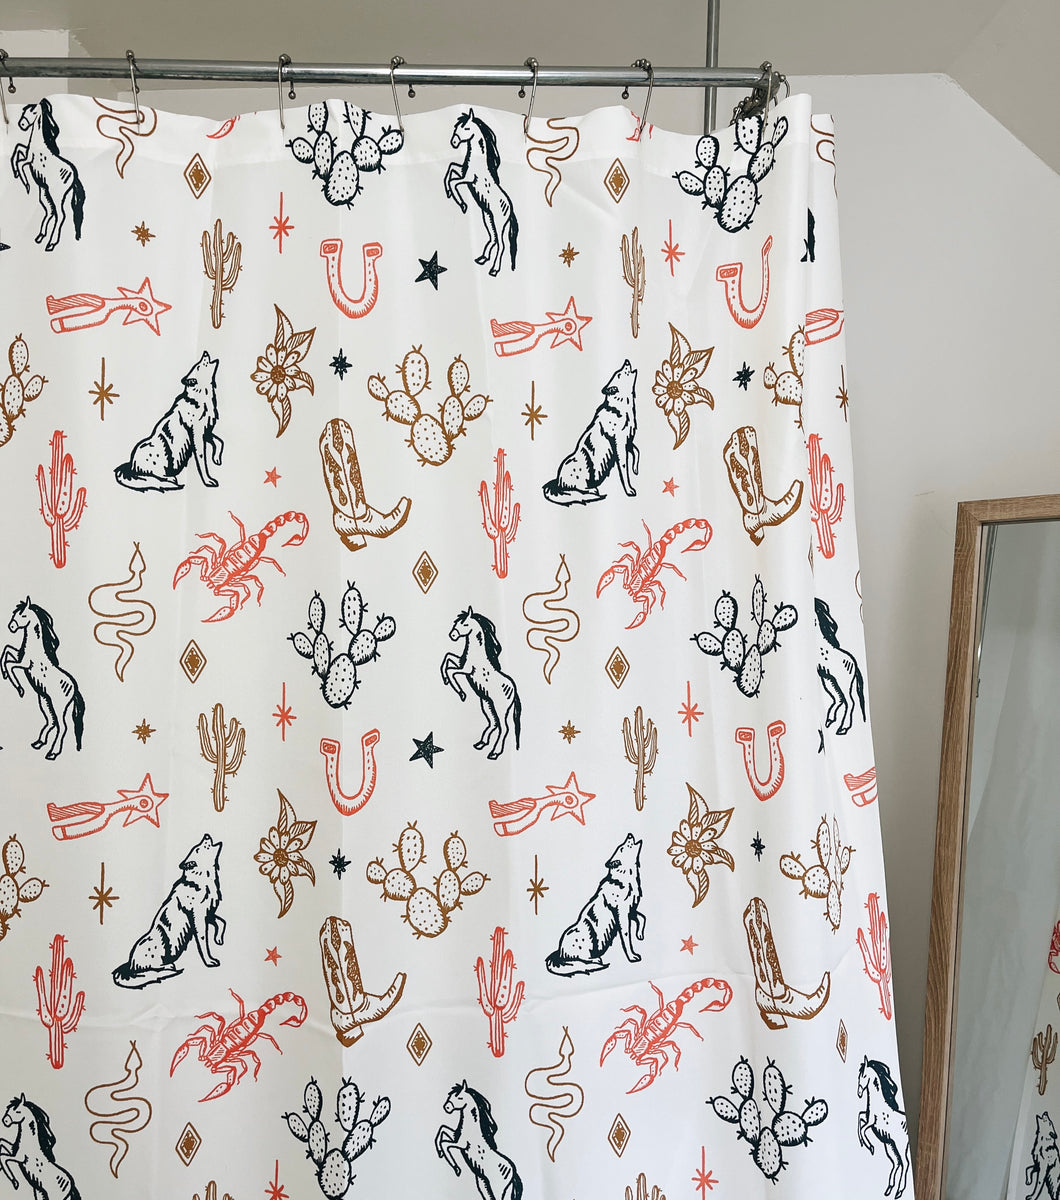 Day Out West - Shower Curtain